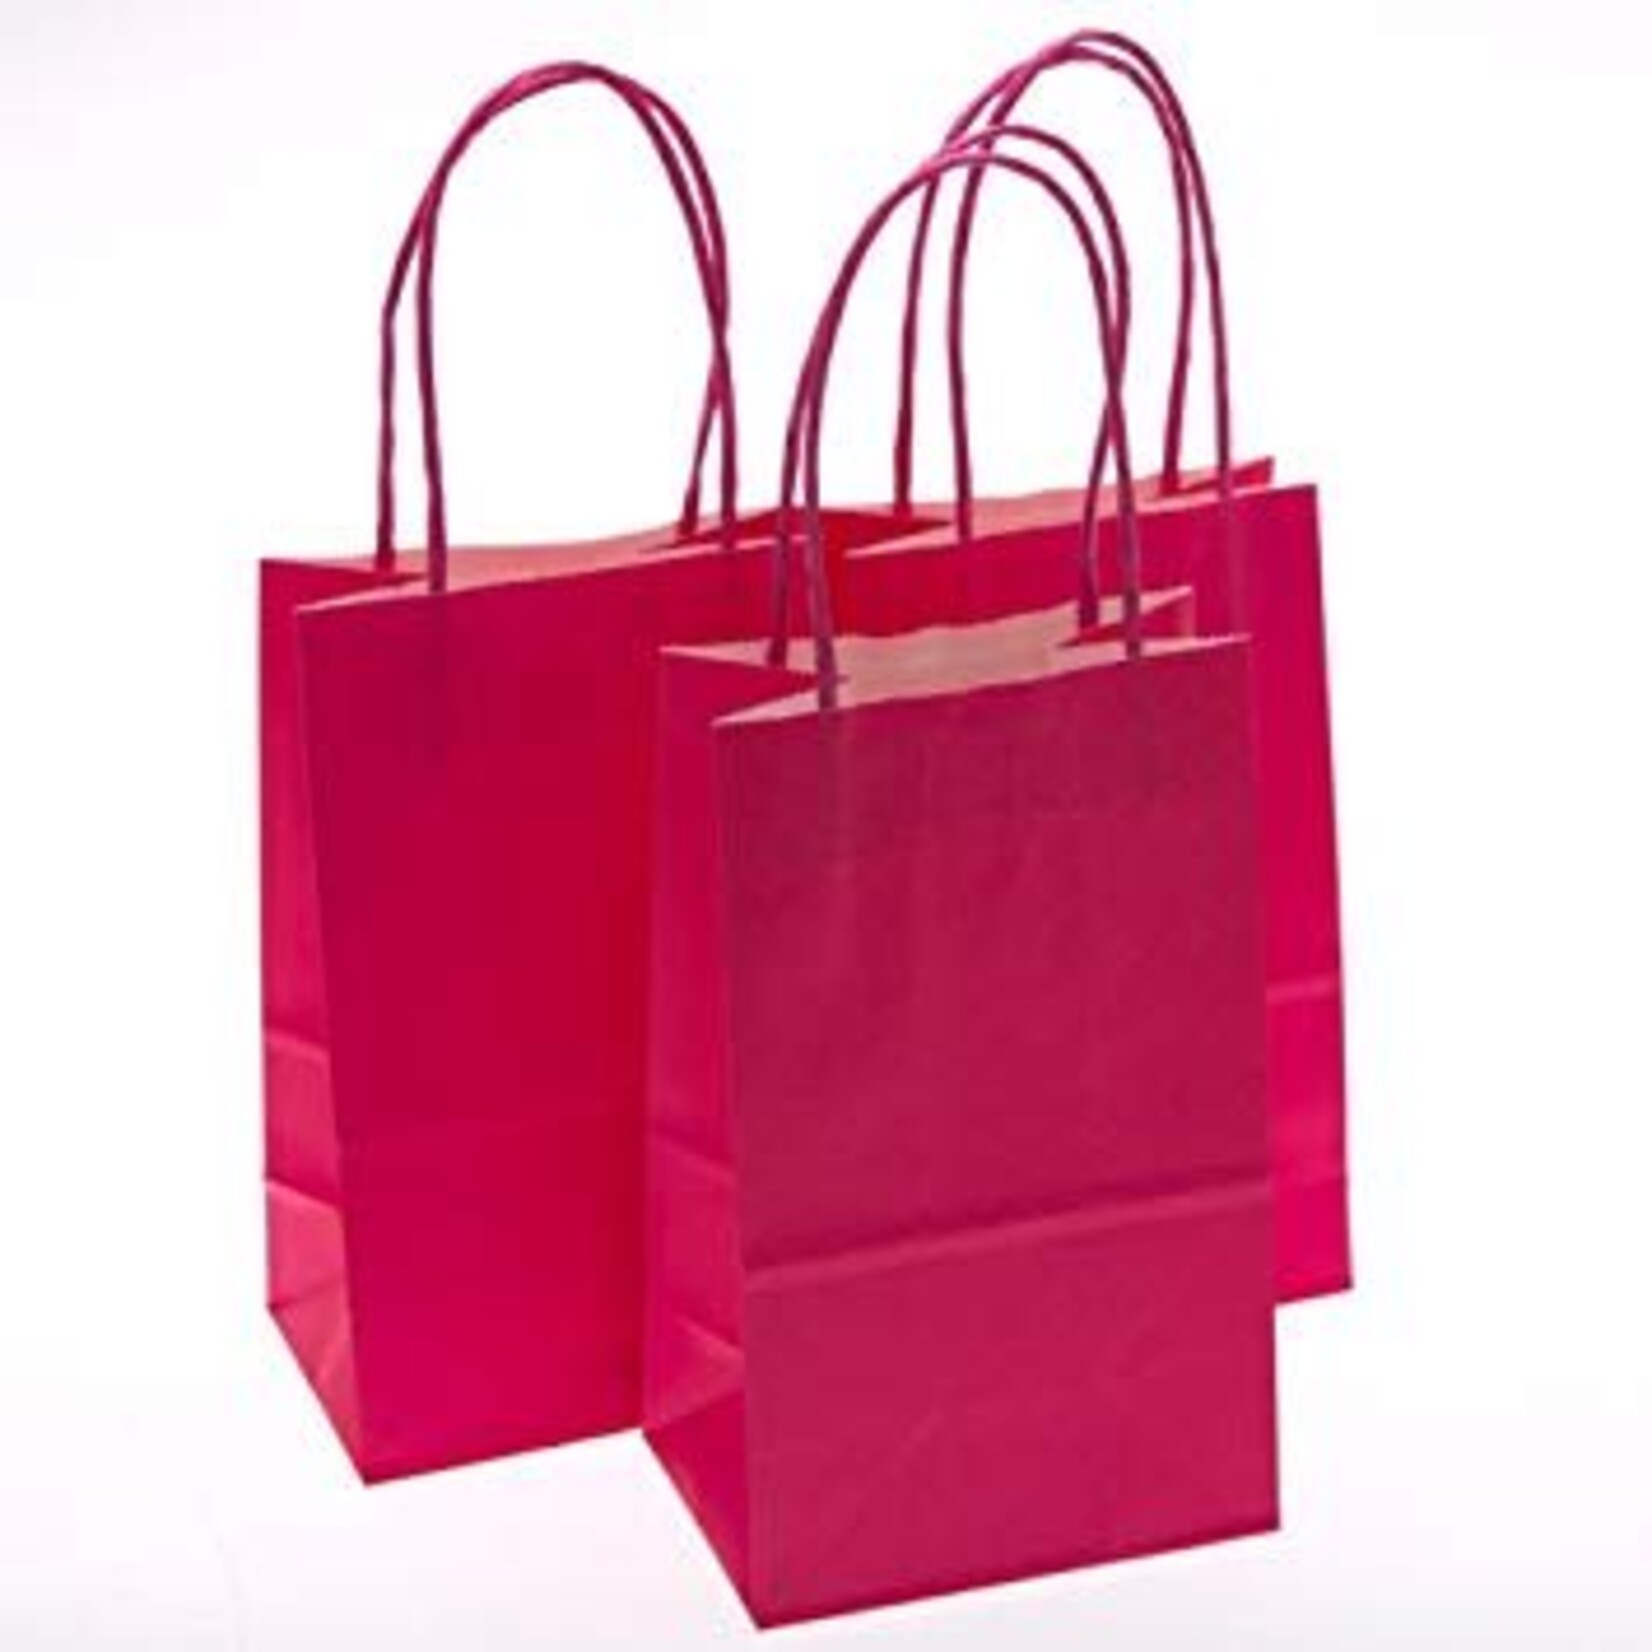 Solid Colour Favor Bags, 10ct (Natural, Blue, Pink & Apple Green)